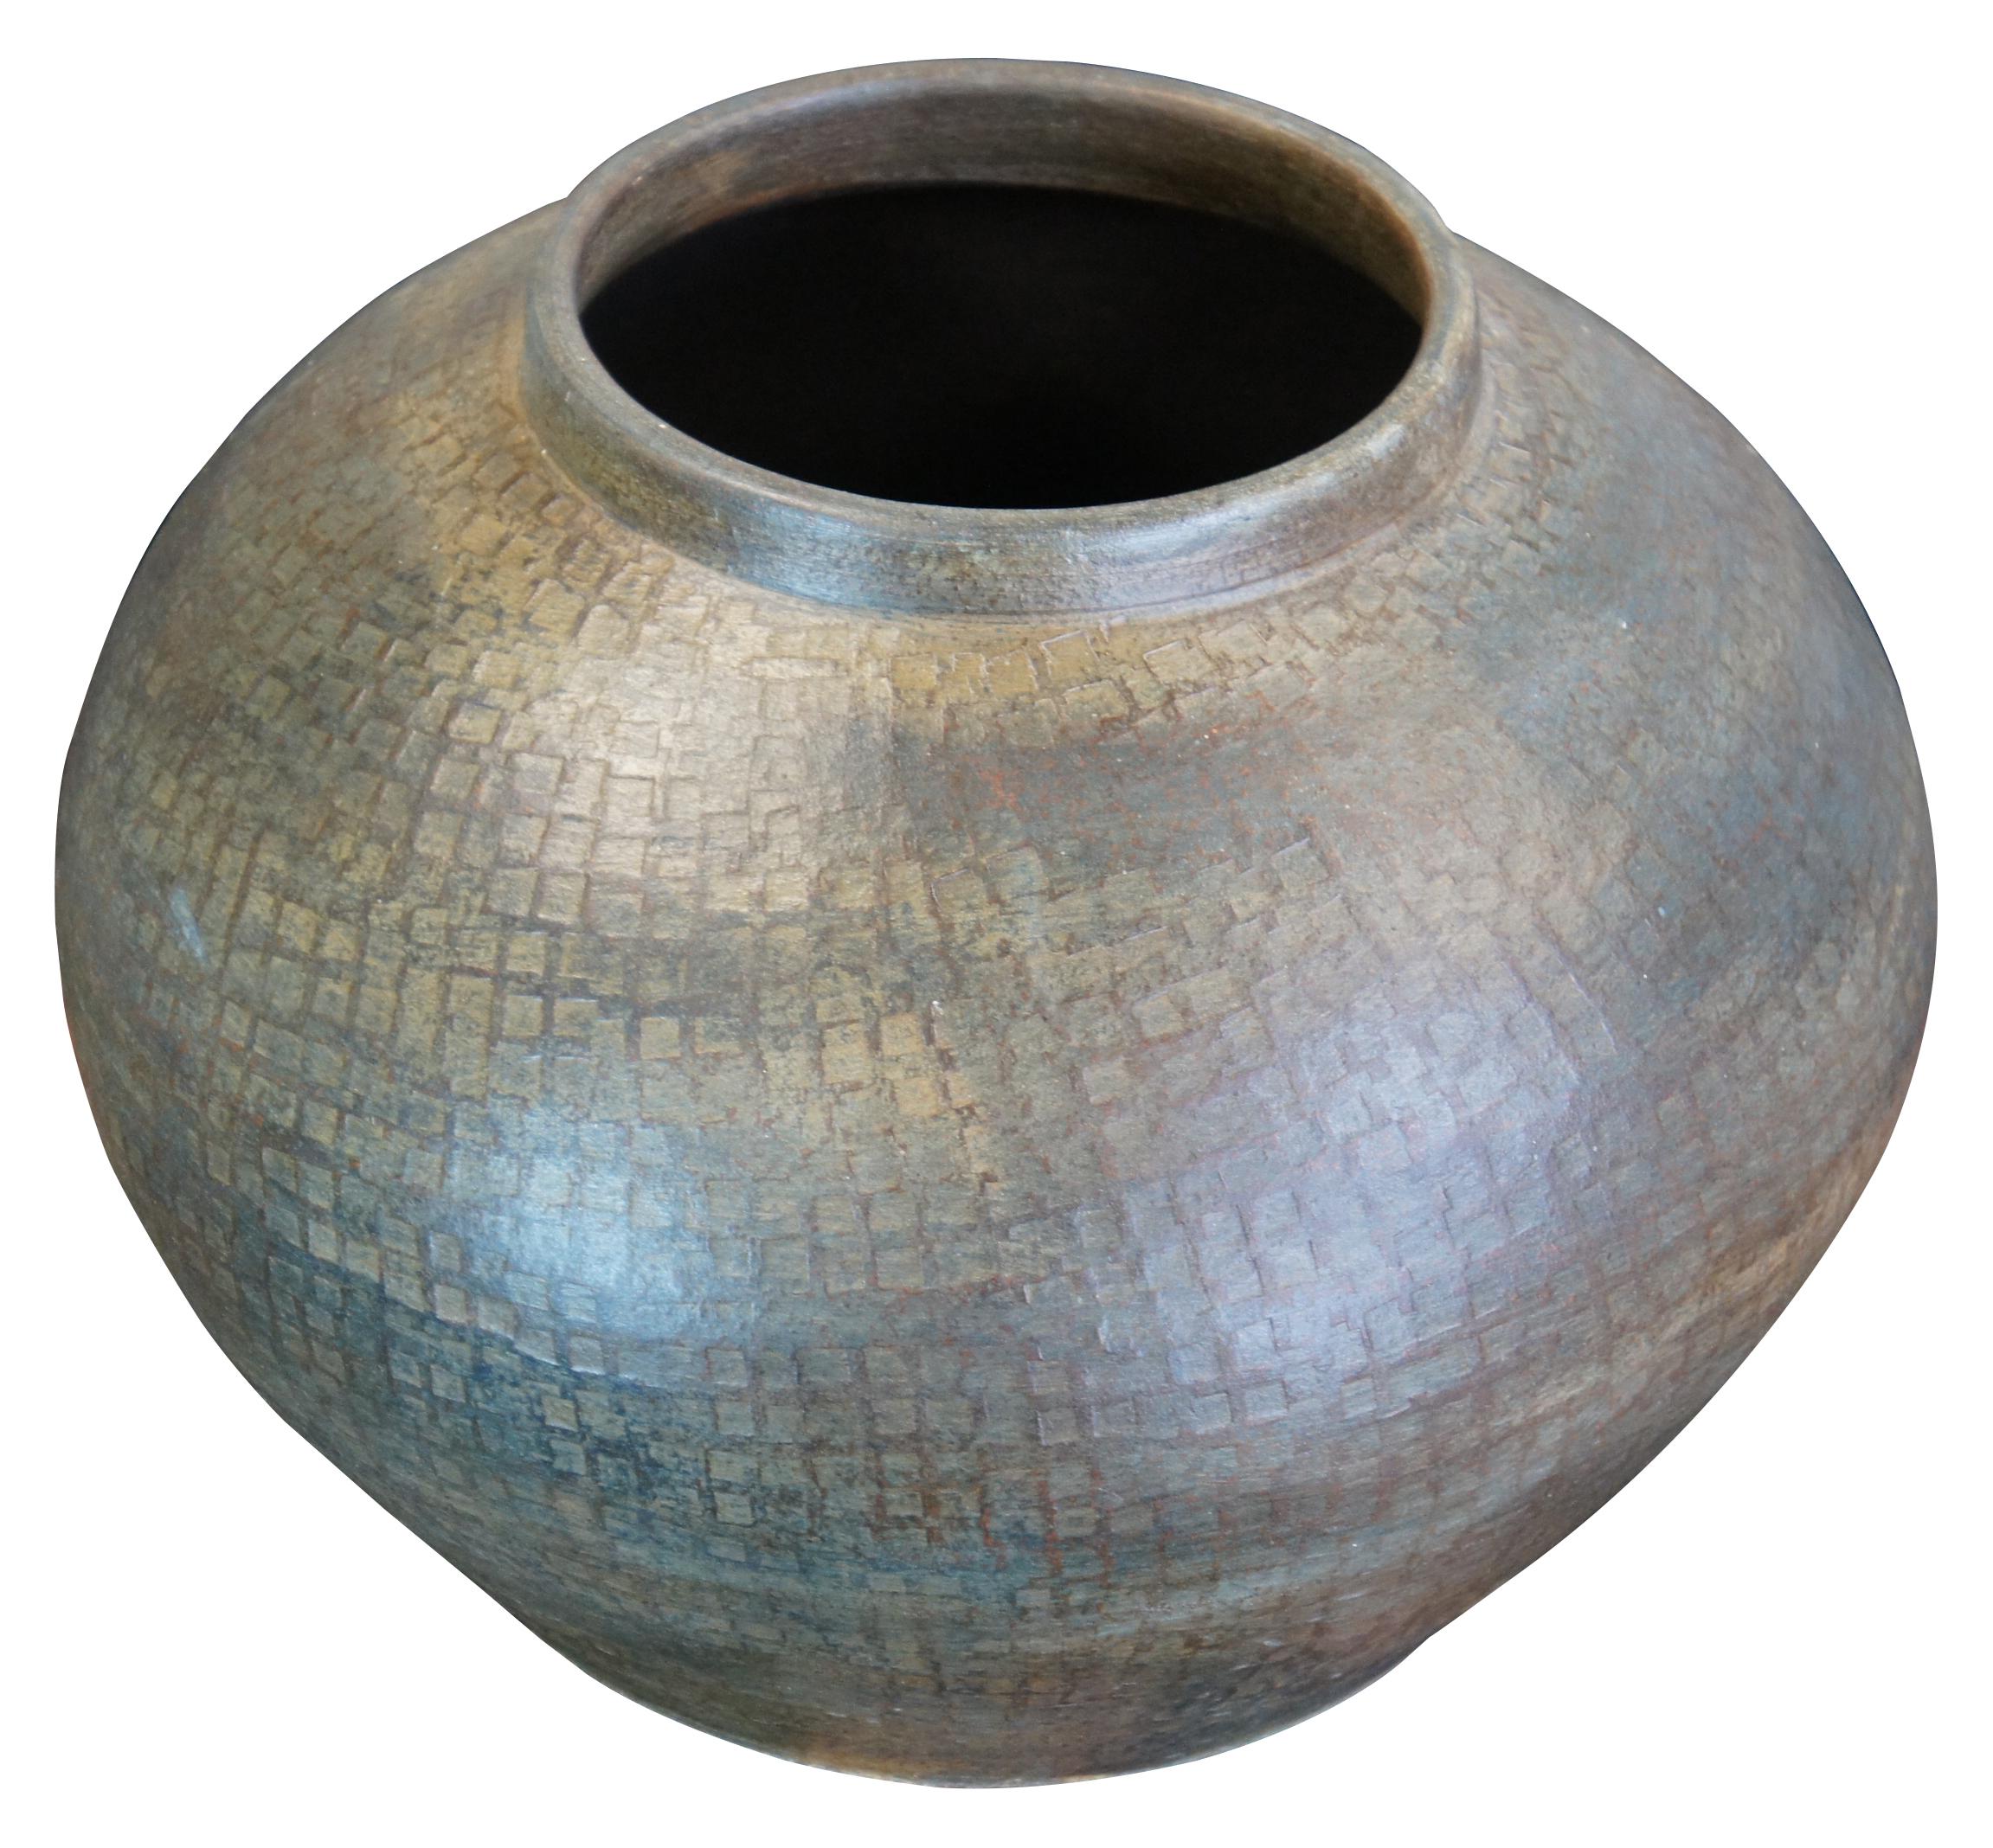 Maitland Smith green ceramic vase. Raku style with a squatty form and unique square imprint pattern. Measure: 14